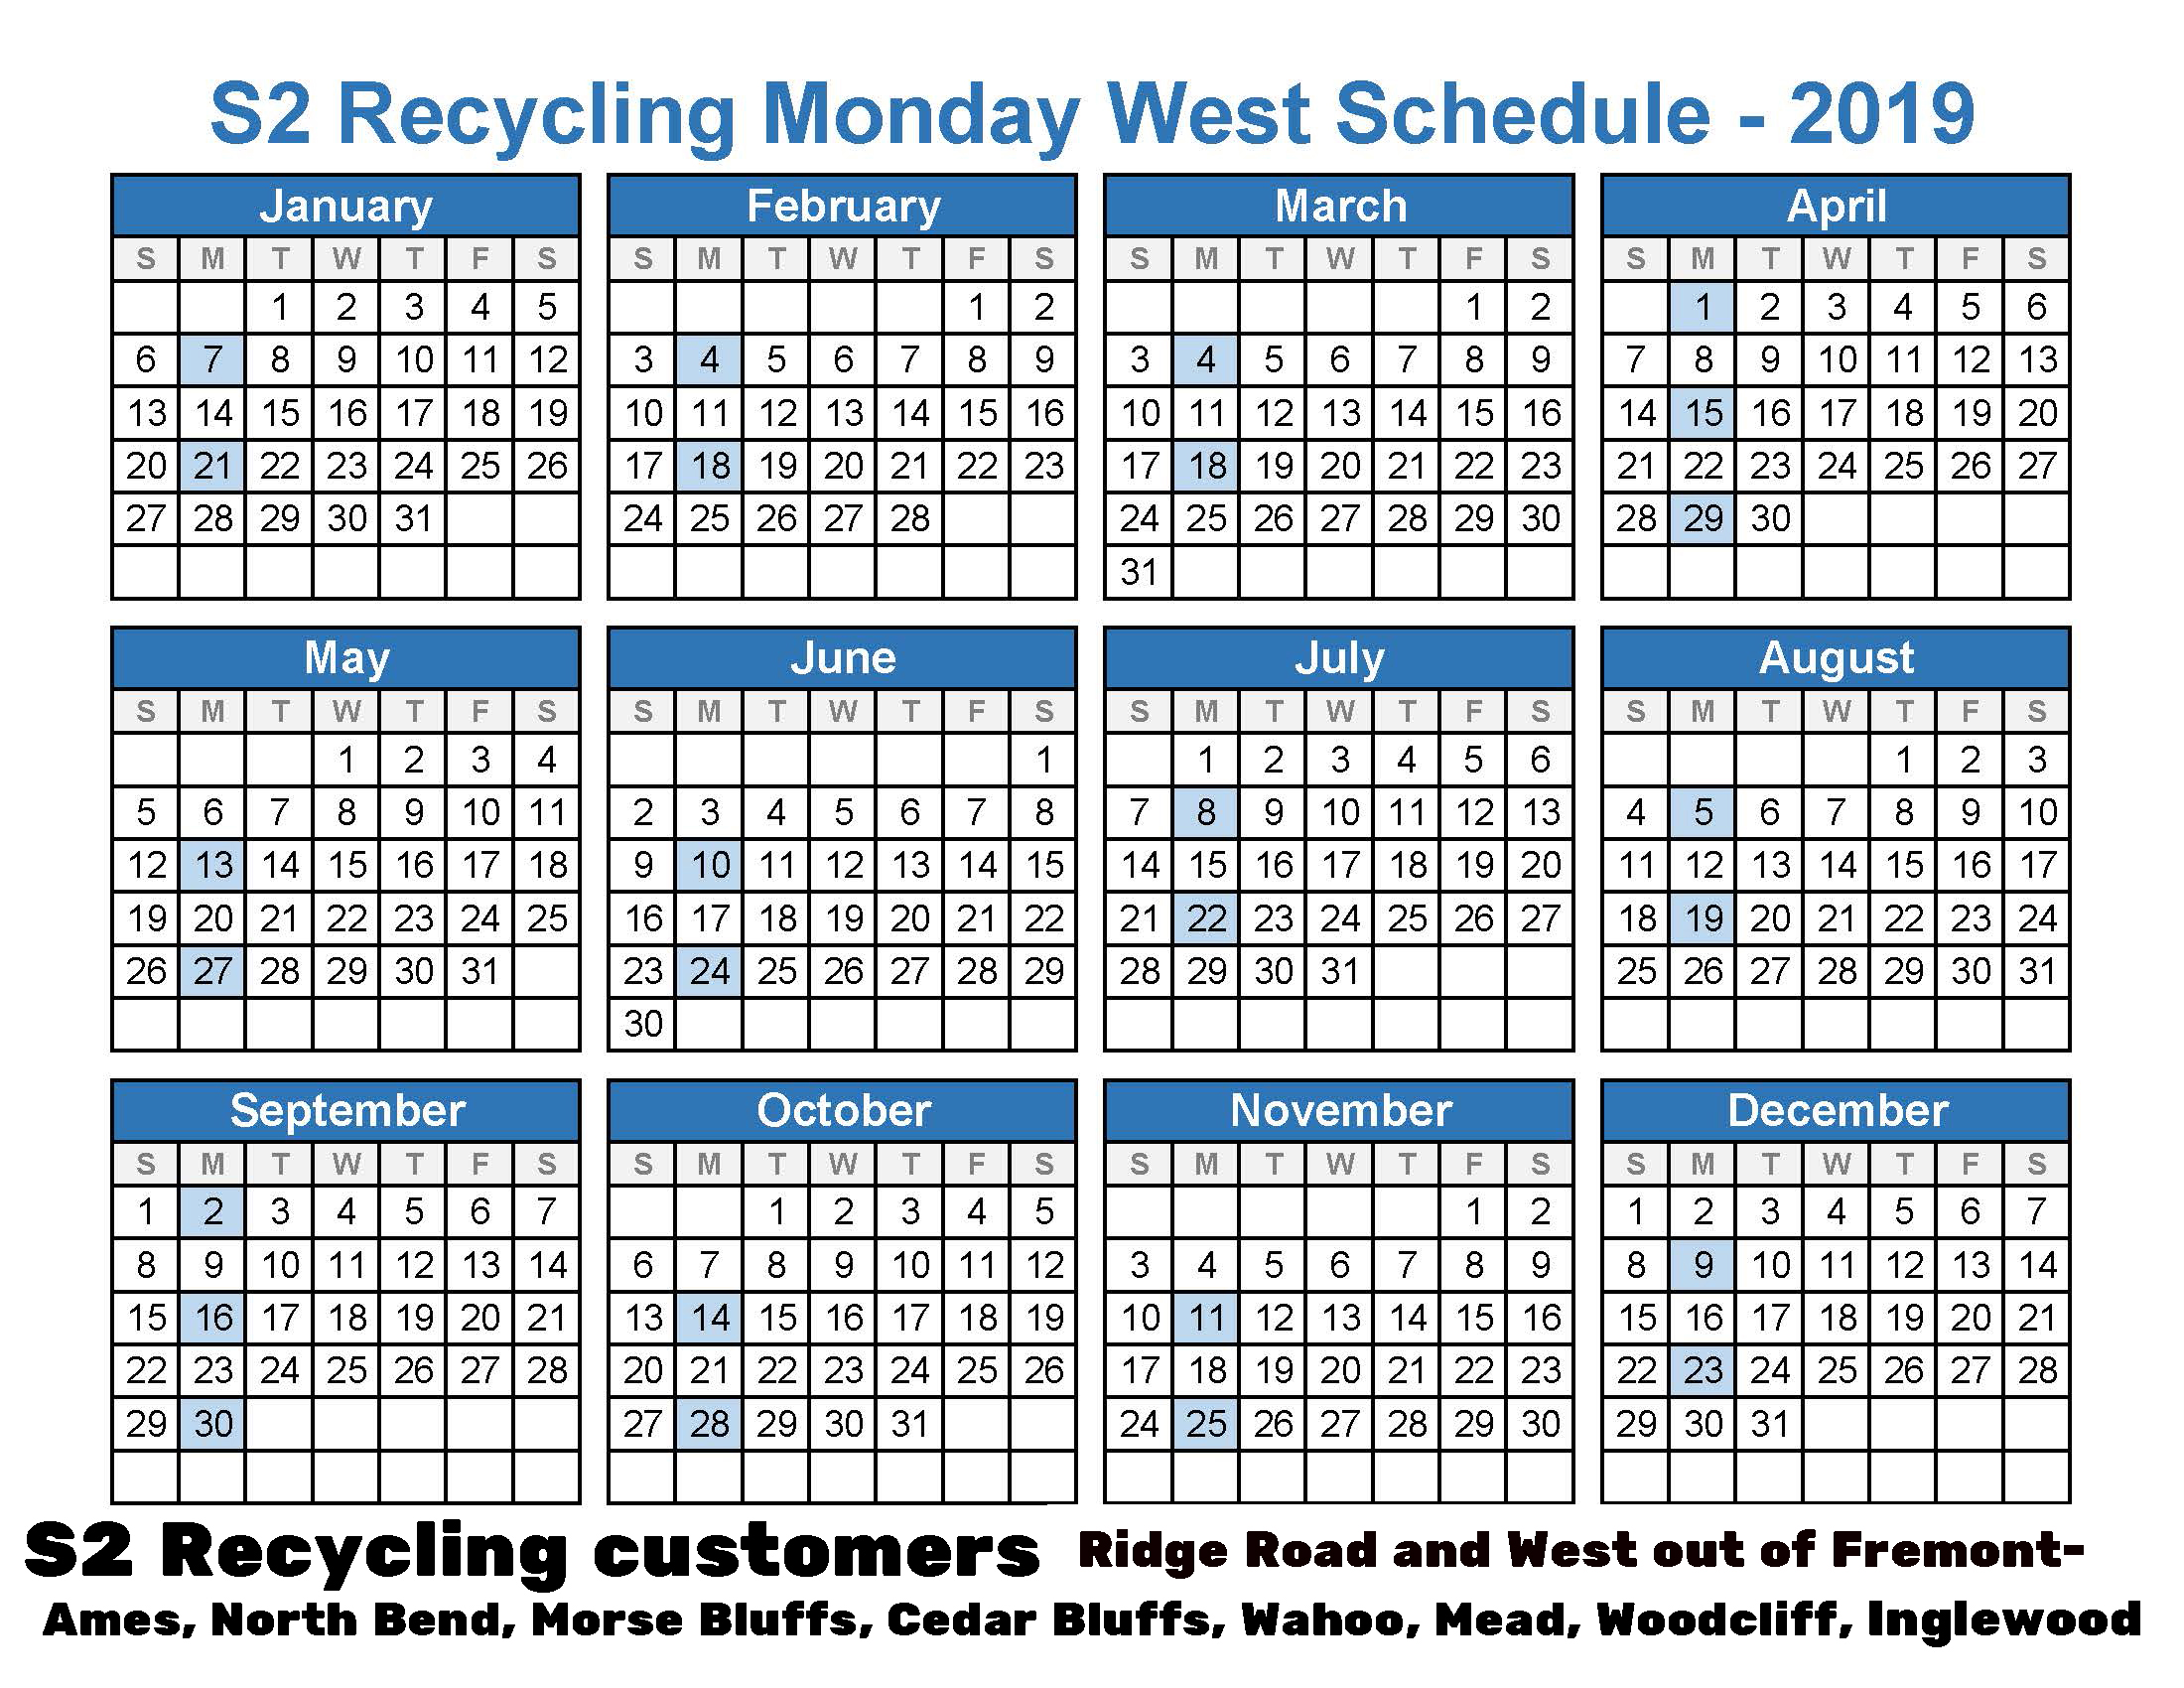 2019 Recycling Monday West Schedule